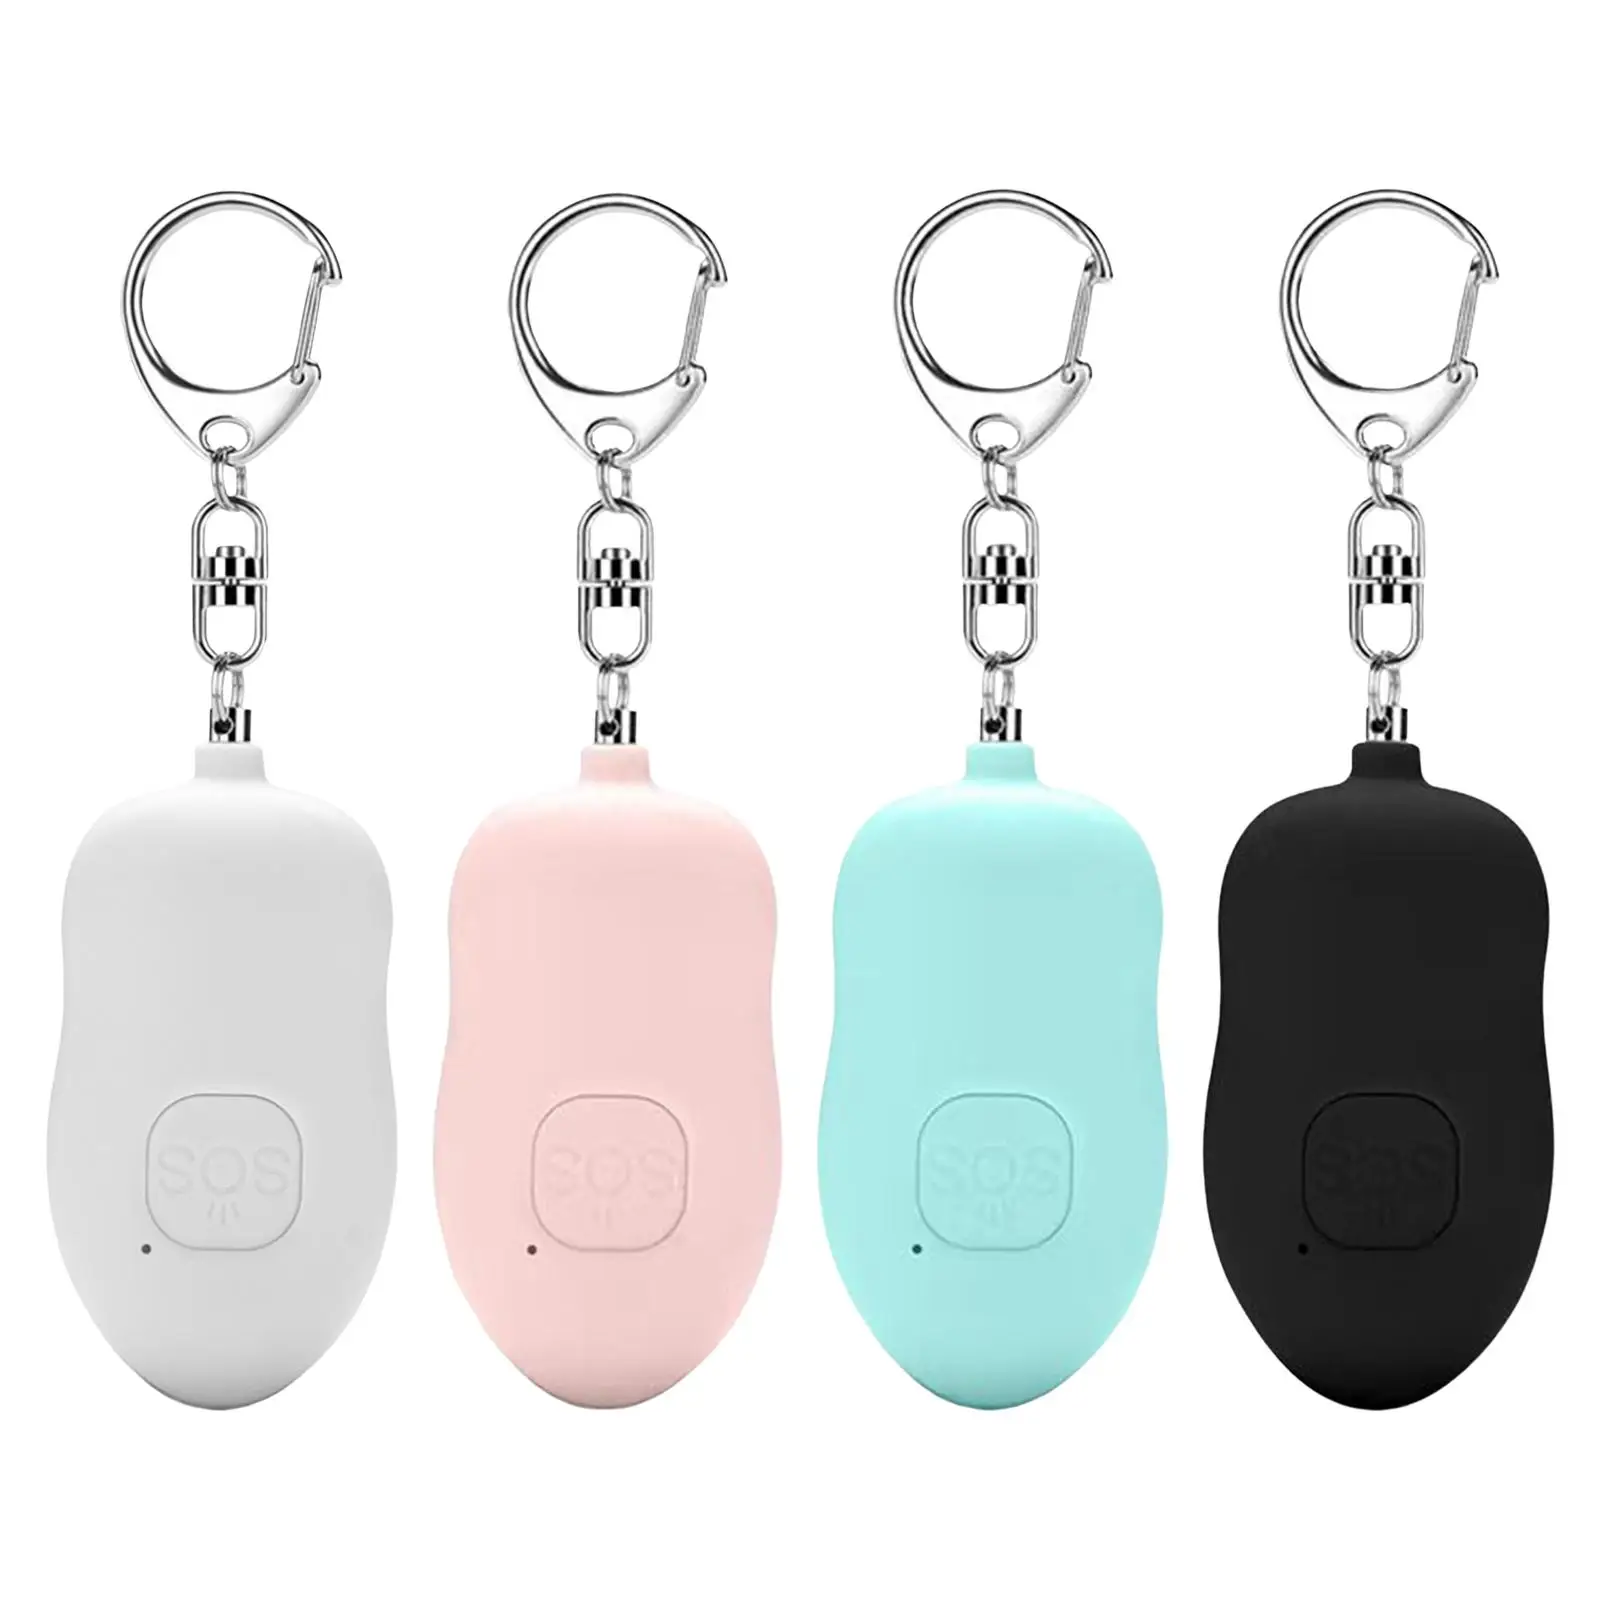 140dB Personal Alarm Emergency LED Flashlight Whistle Security Alarm Keychain for Travelling Night Working Kids Women